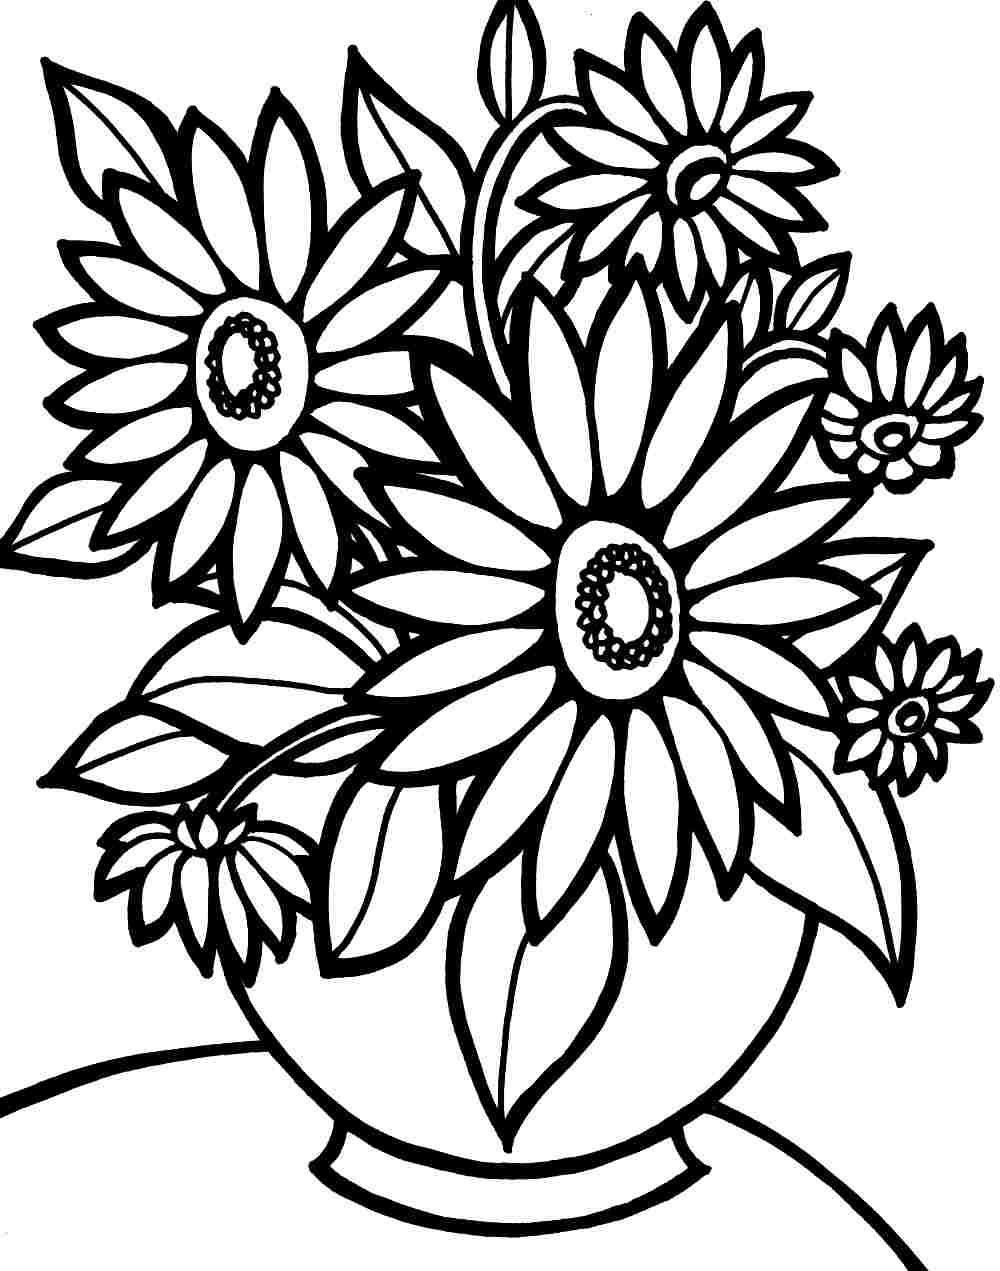 Flower Coloring Pages | Free Download Best Flower Coloring Pages On - Free Printable Flower Coloring Pages For Adults